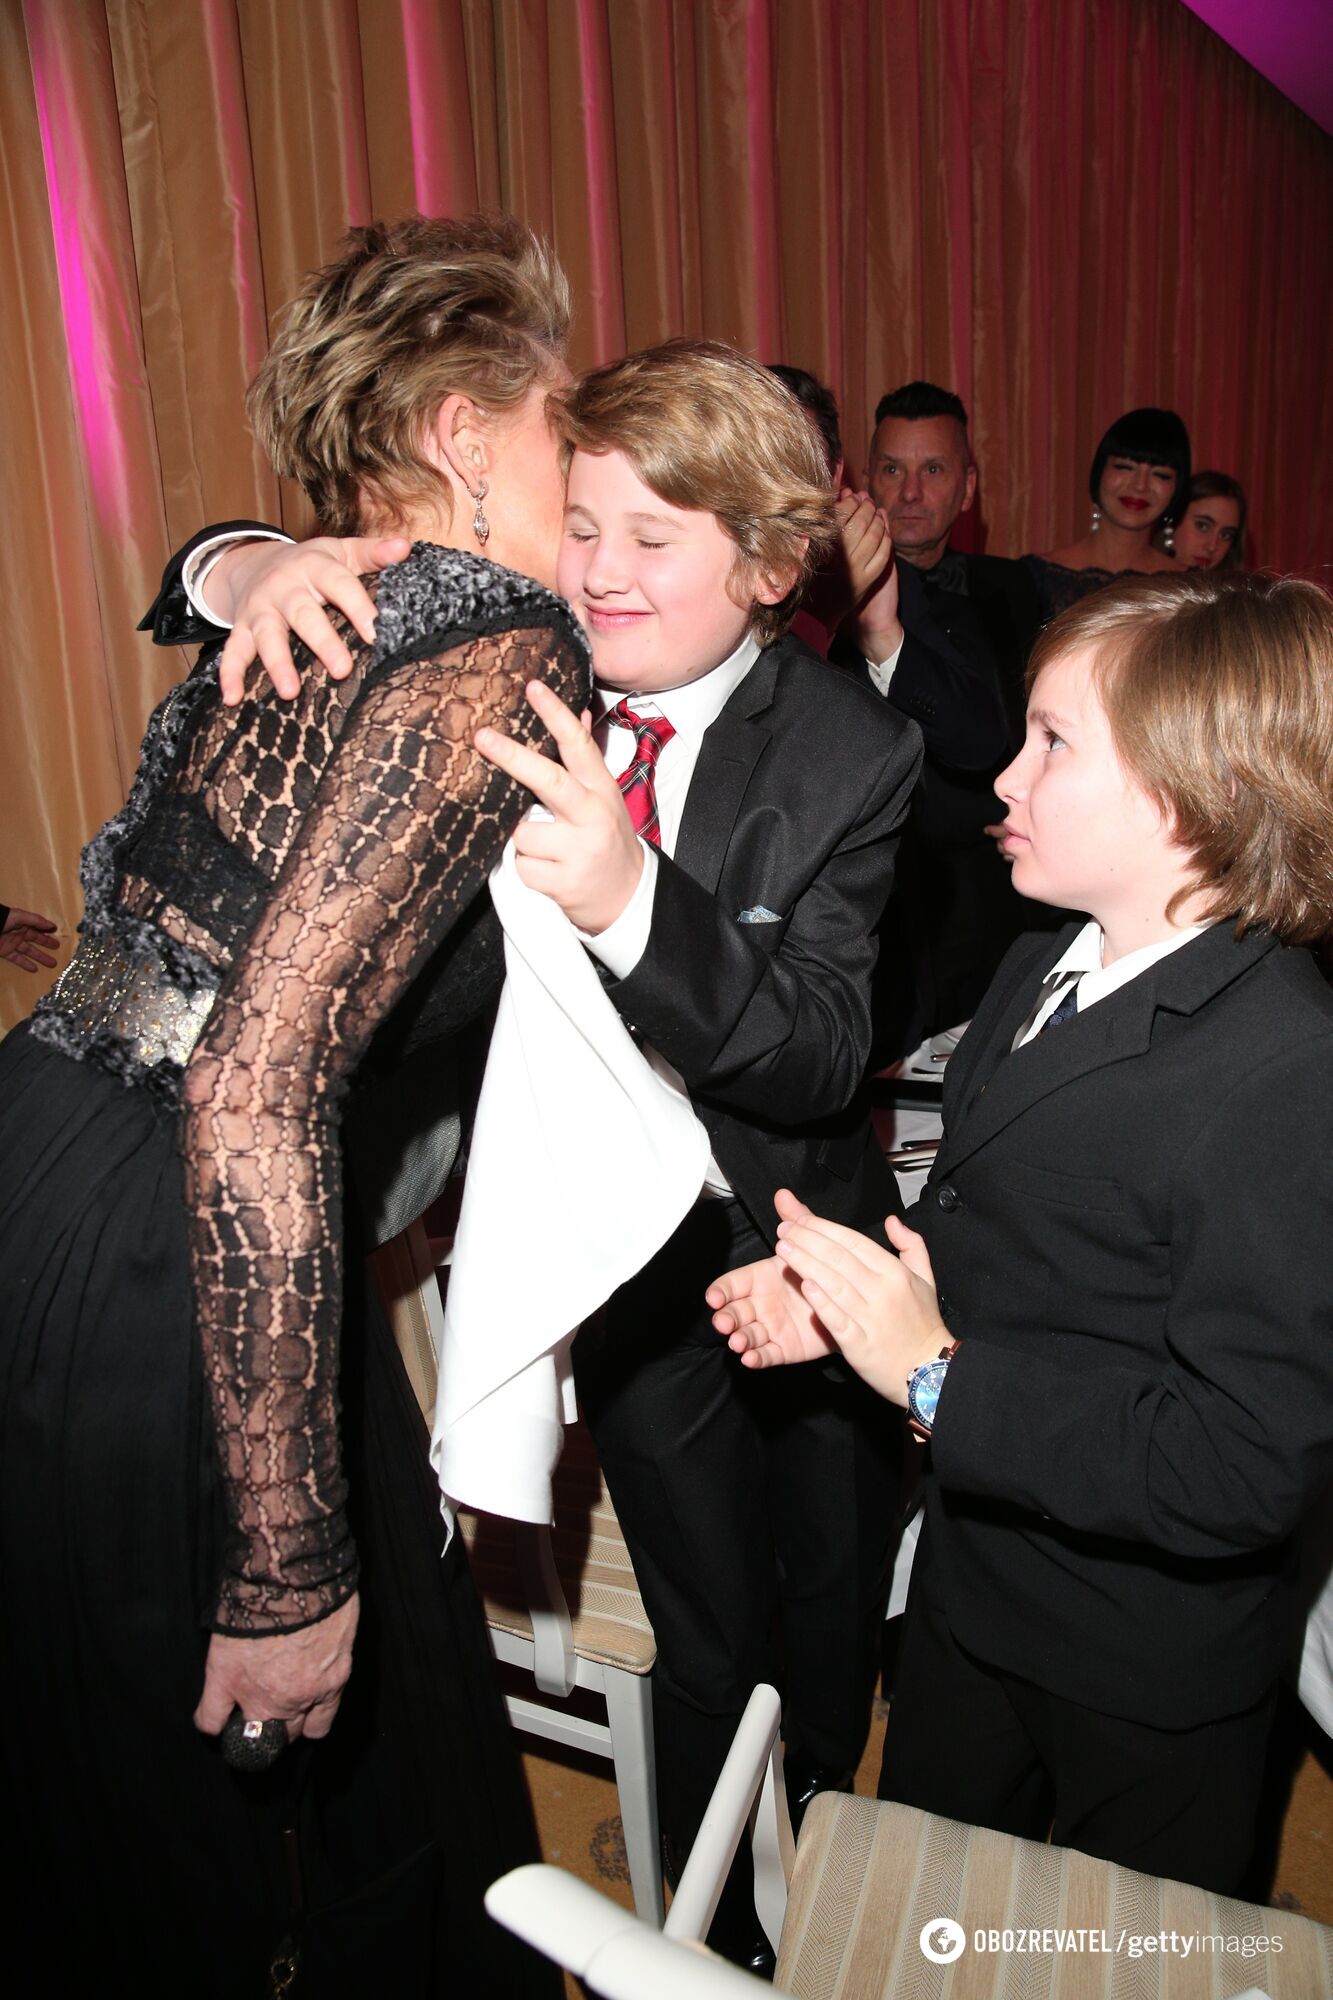 Sharon Stone showed her younger sons, whom she adopted more than 16 years ago, in rare photos: the actress hid them from fans for a long time